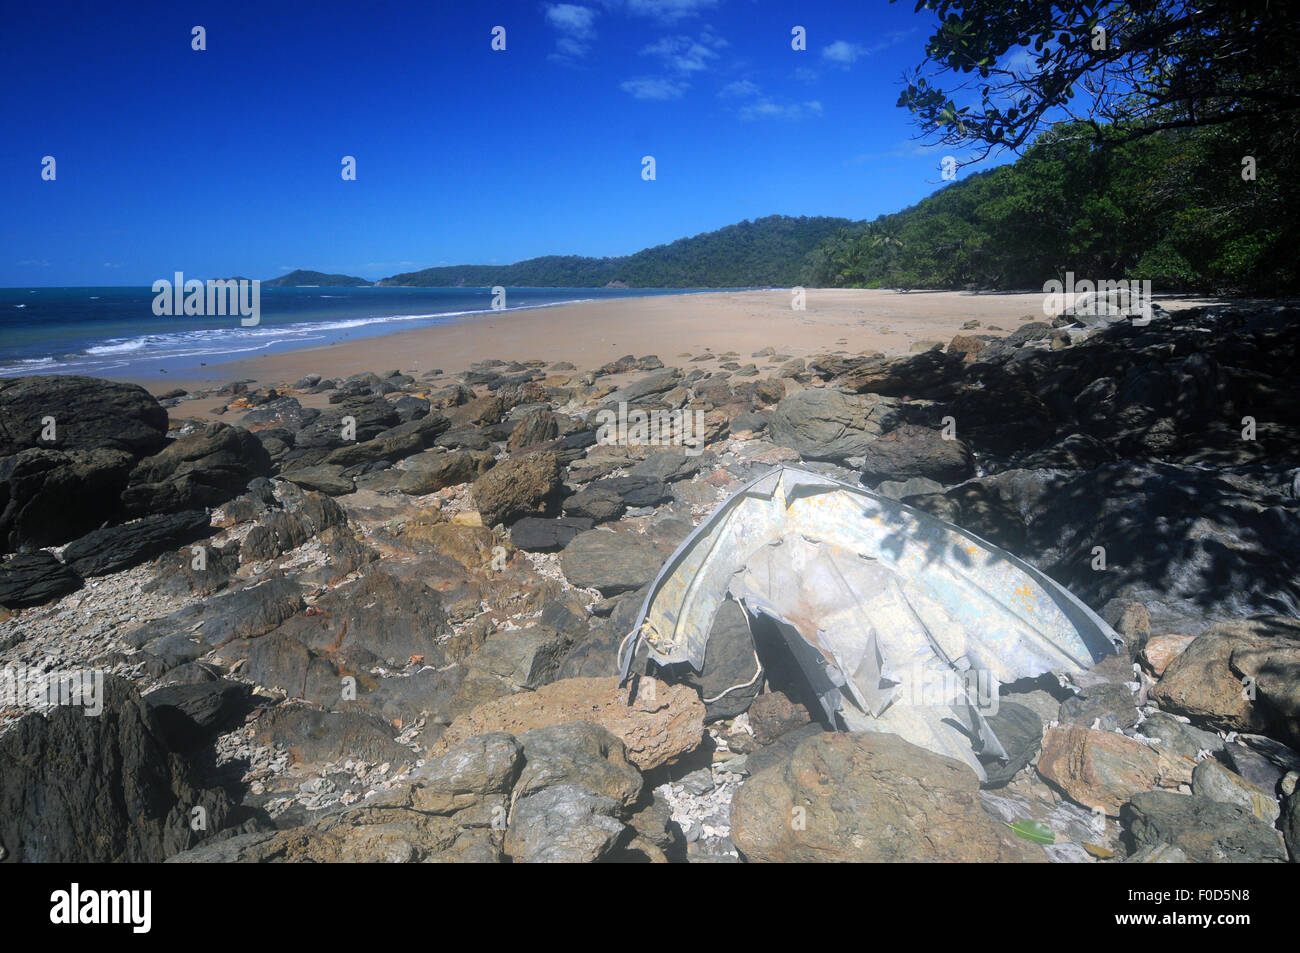 Remains of wrecked boat at Shipwreck Bay, Daintree, Queensland, Australia Stock Photo